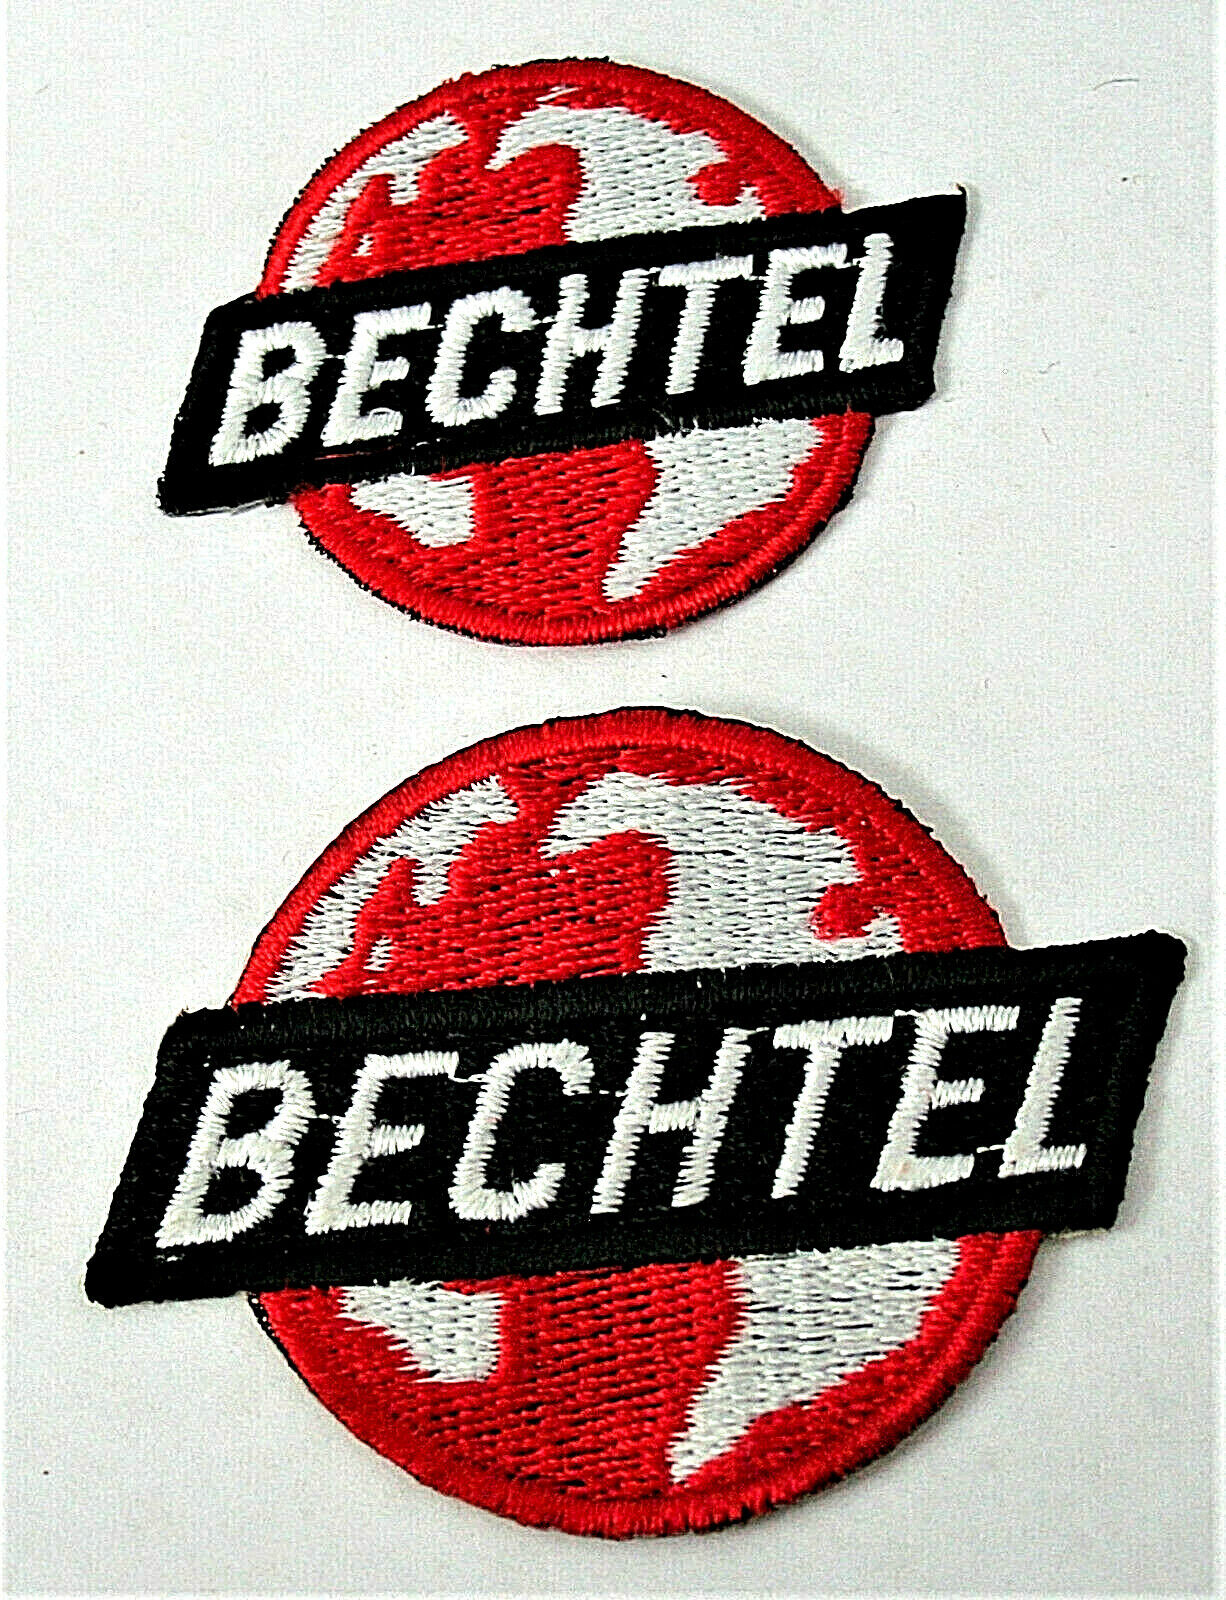 2 Diff Size Bechtel Engineering Construction Company Hat Patch New NOS 1990s